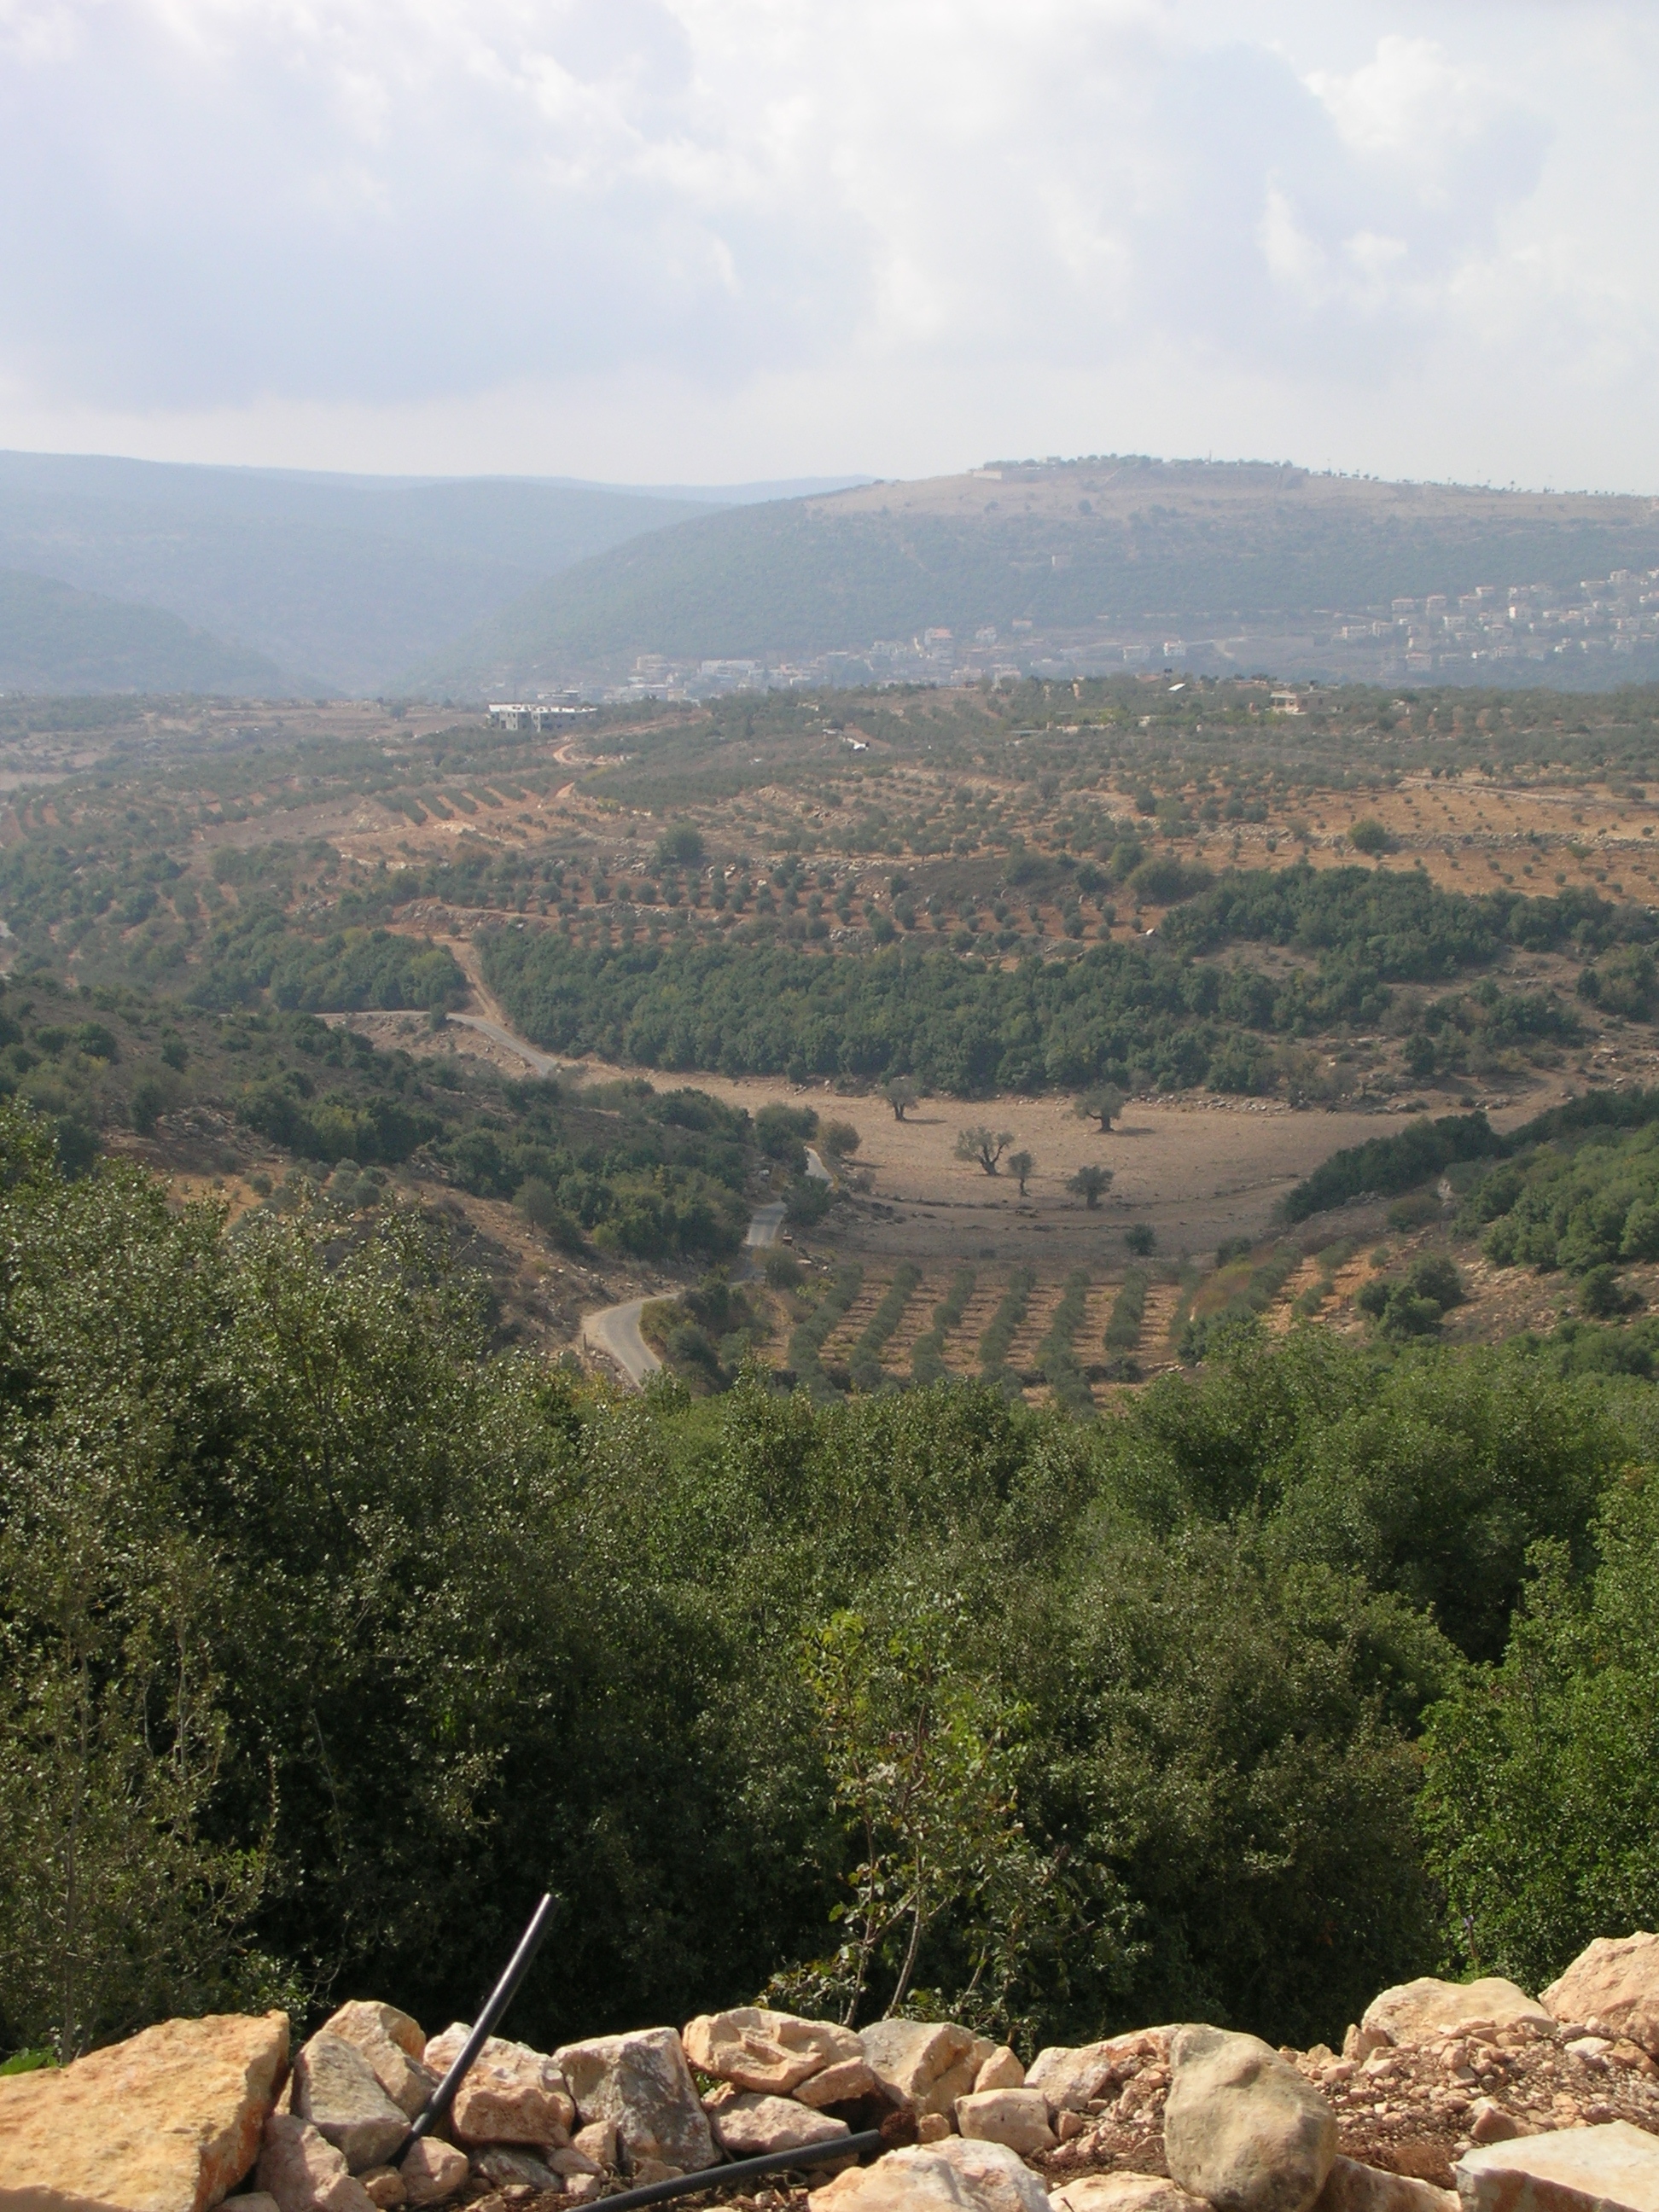 view from the mountaintop village of Matat